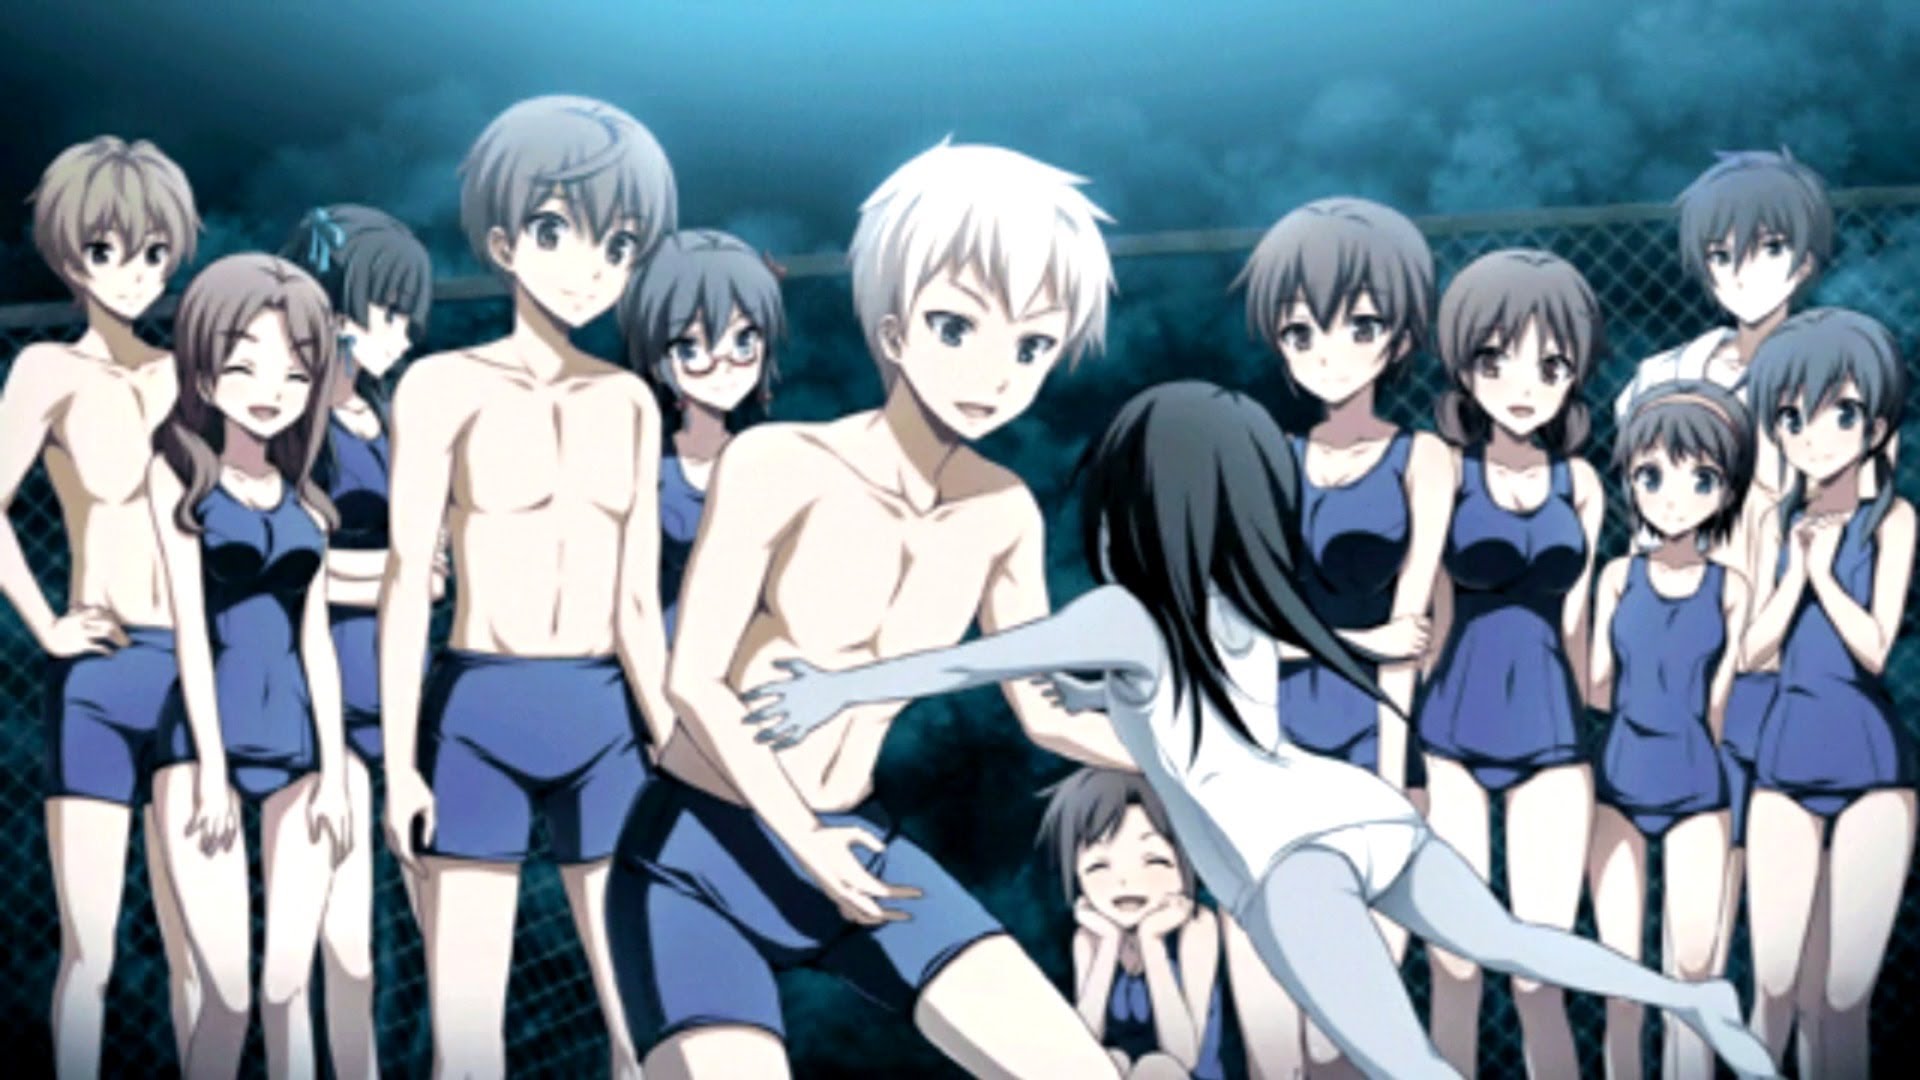 Corpse Party #7